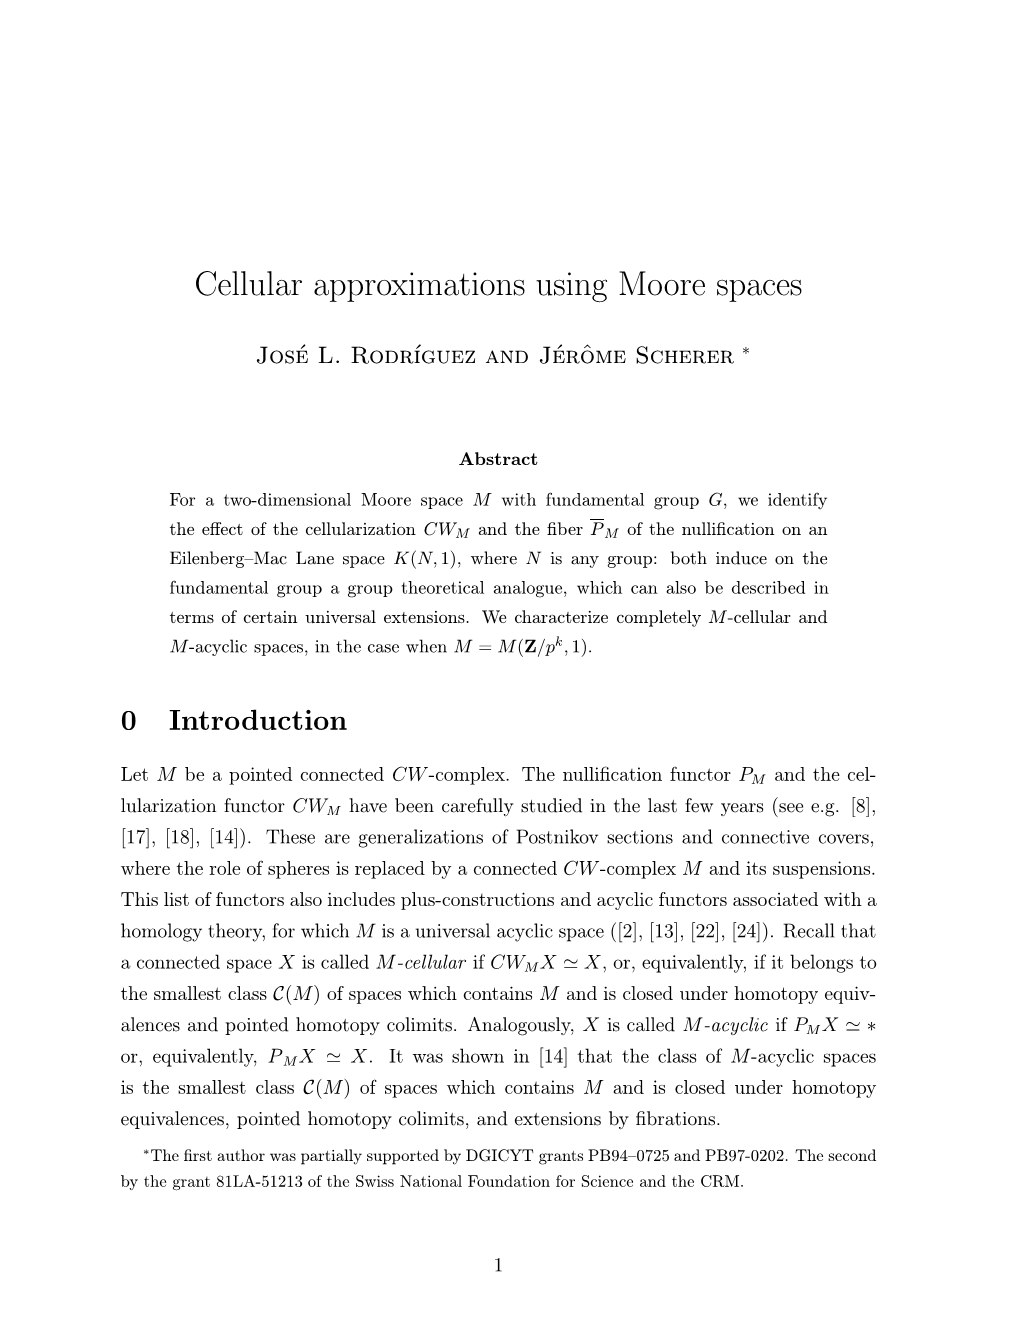 Cellular Approximations Using Moore Spaces